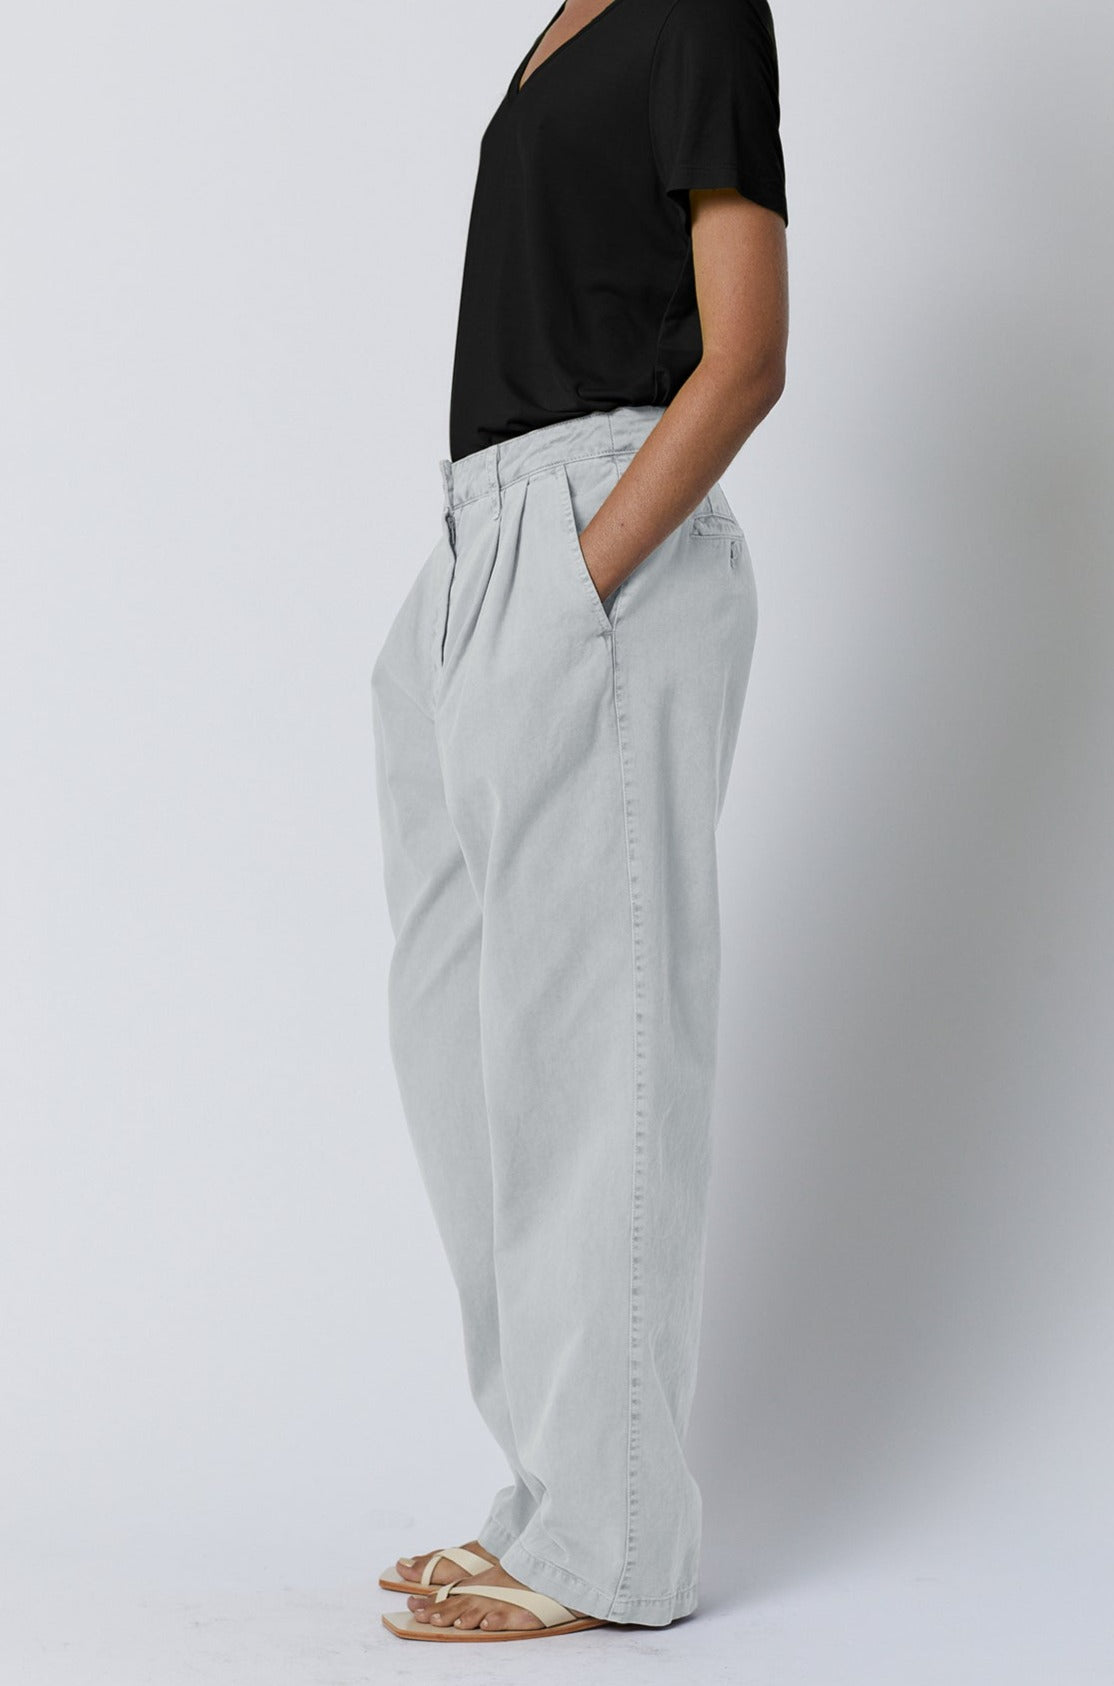 Temescal Pant in candle side-26007137255617